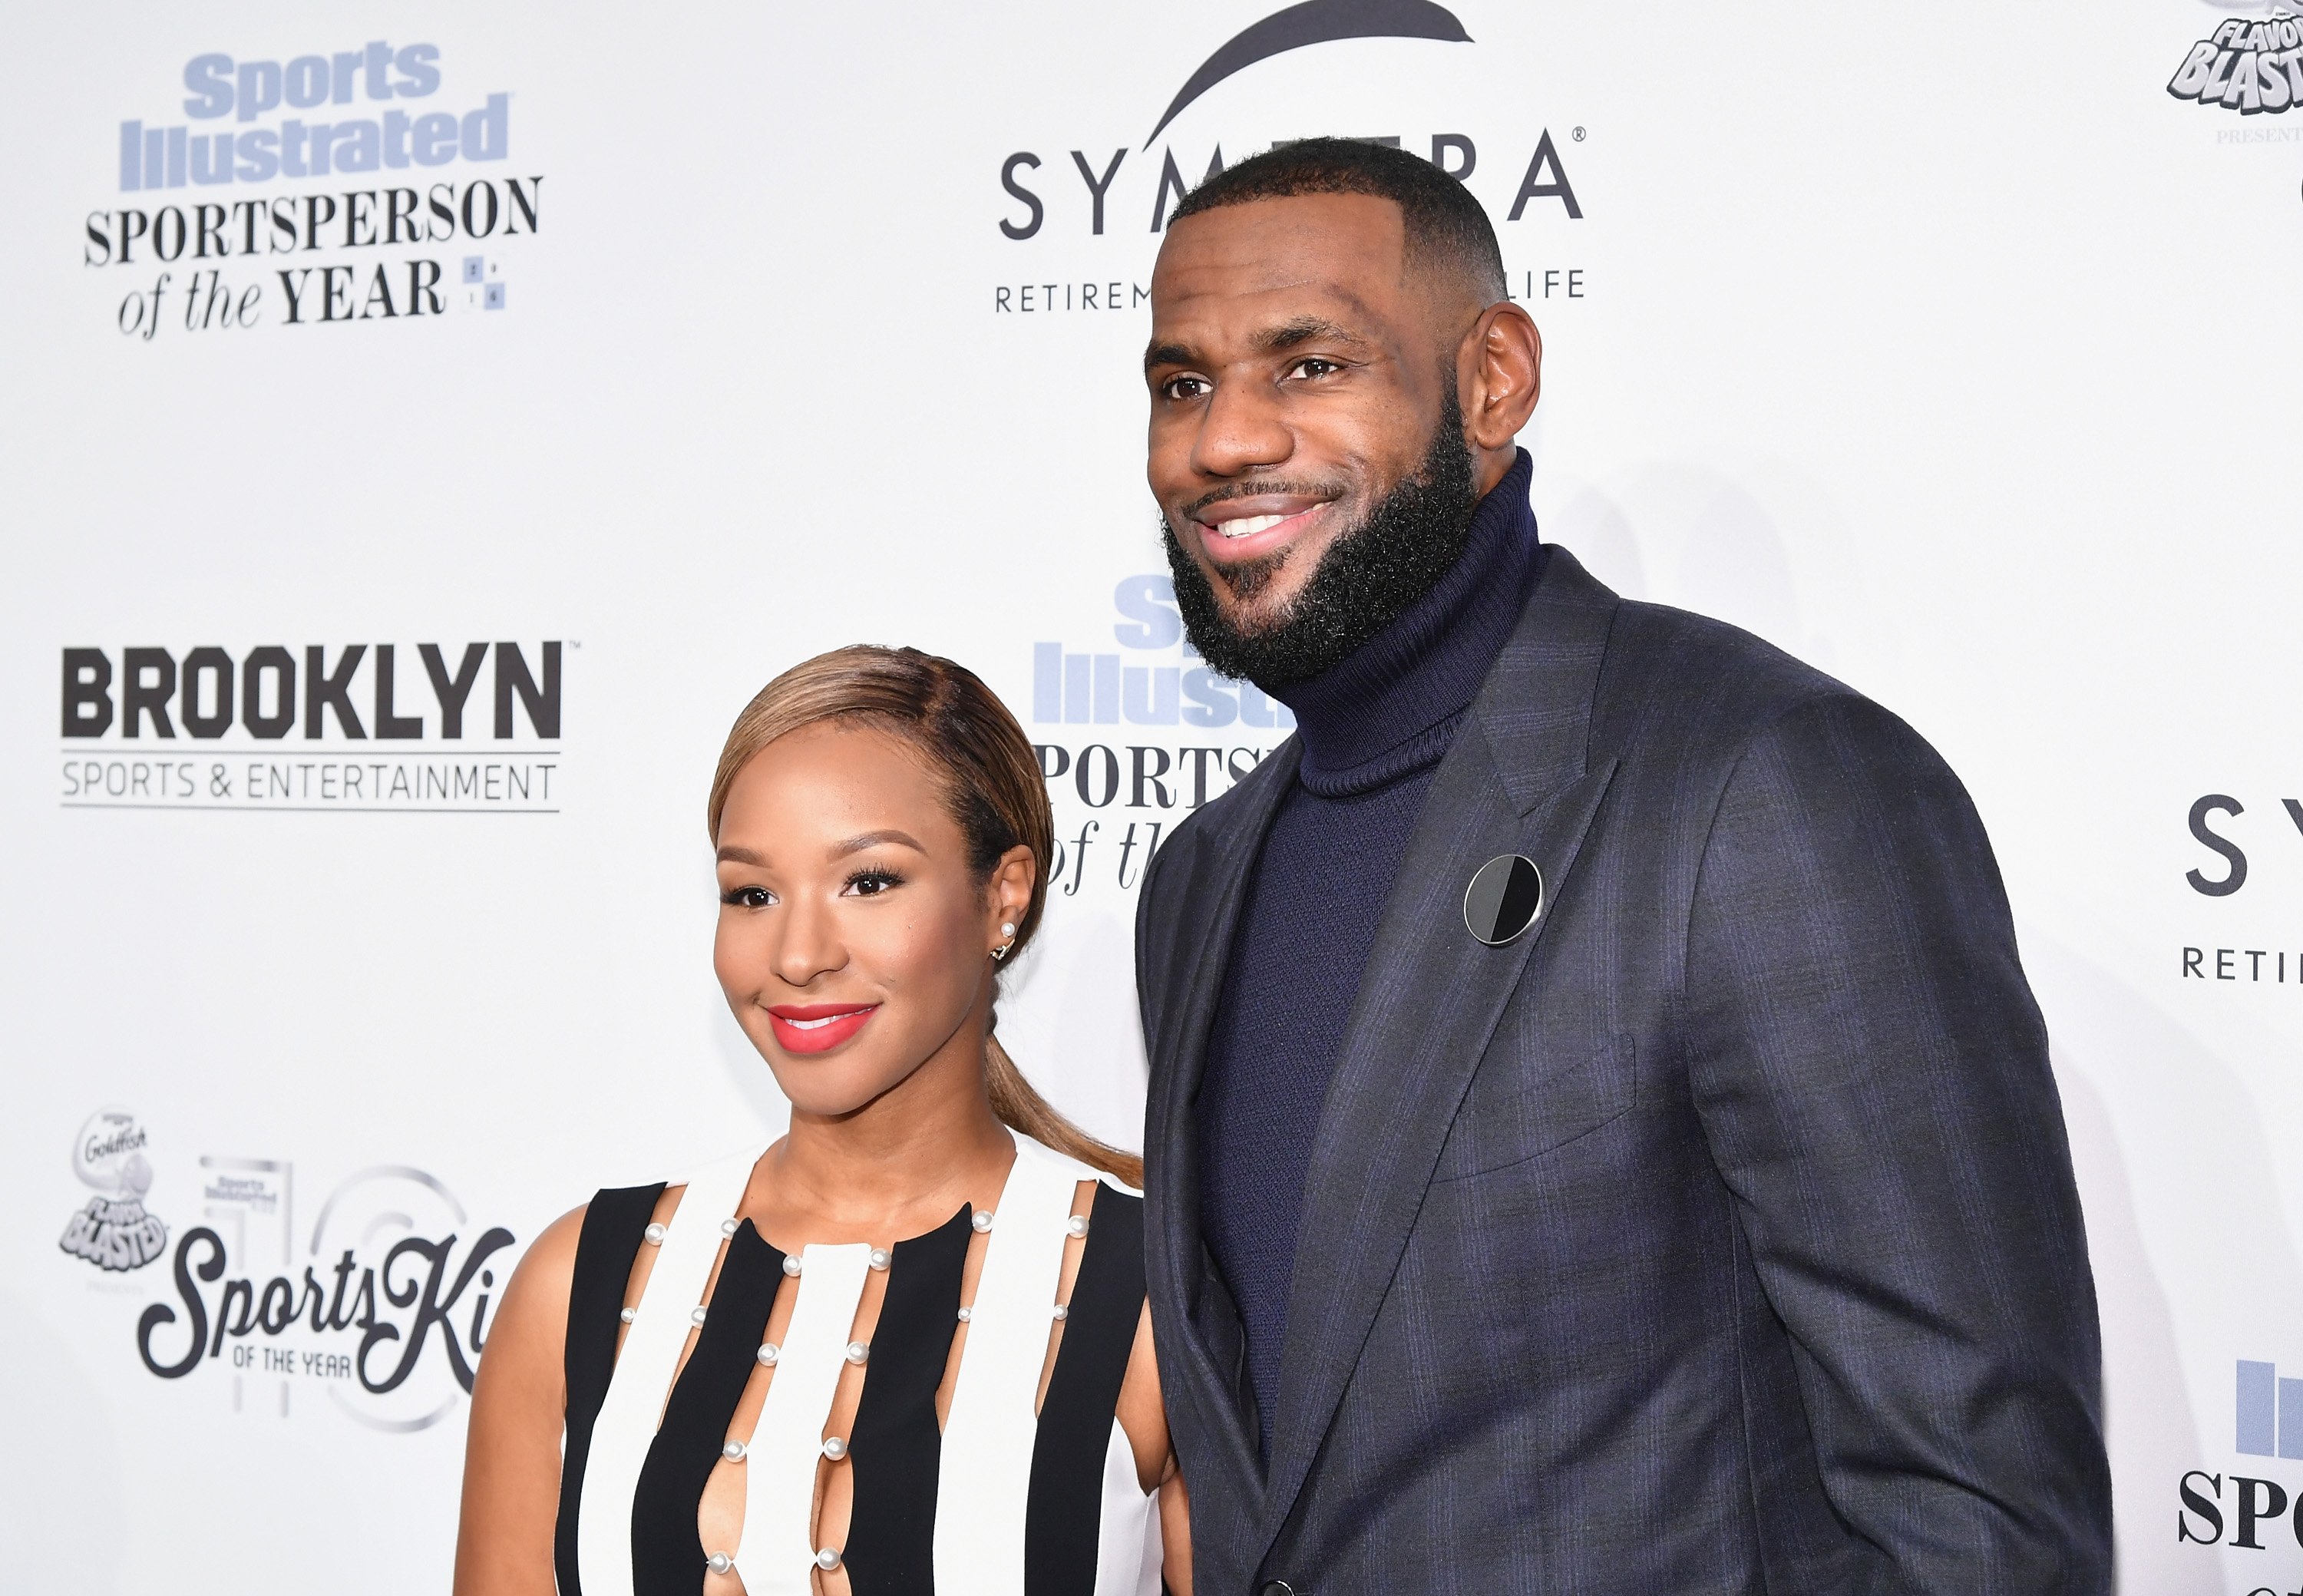 Savannah Brinson and Basketball Player Lebron James attend the Sports Illustrated Sportsperson of the Year Ceremony| Photo: Getty Images